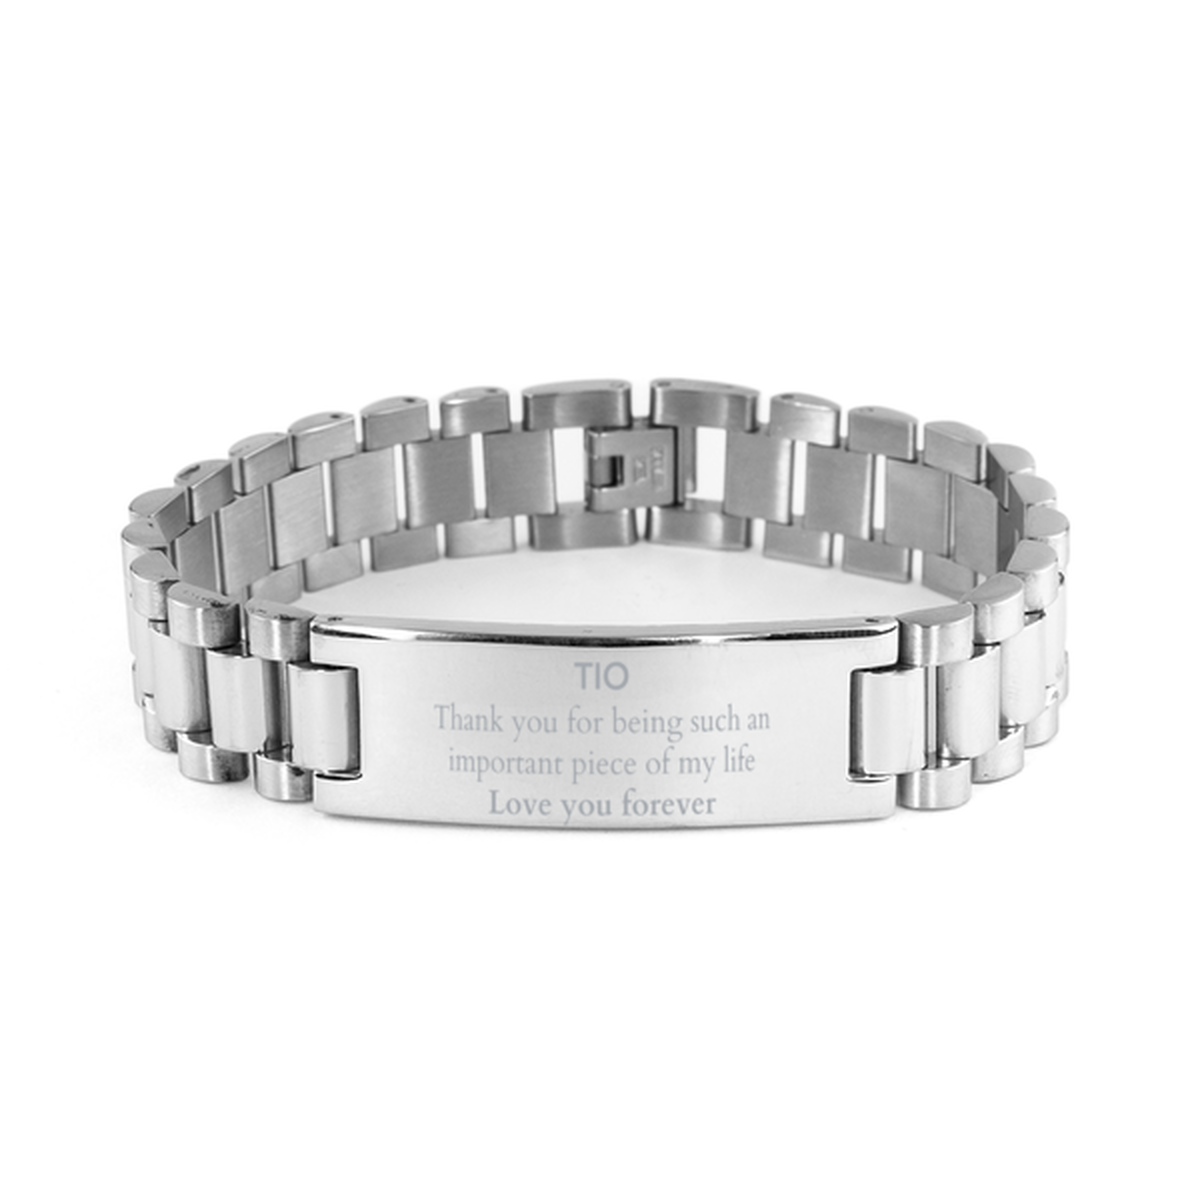 Appropriate Tio Ladder Stainless Steel Bracelet Epic Birthday Gifts for Tio Thank you for being such an important piece of my life Tio Christmas Mothers Fathers Day